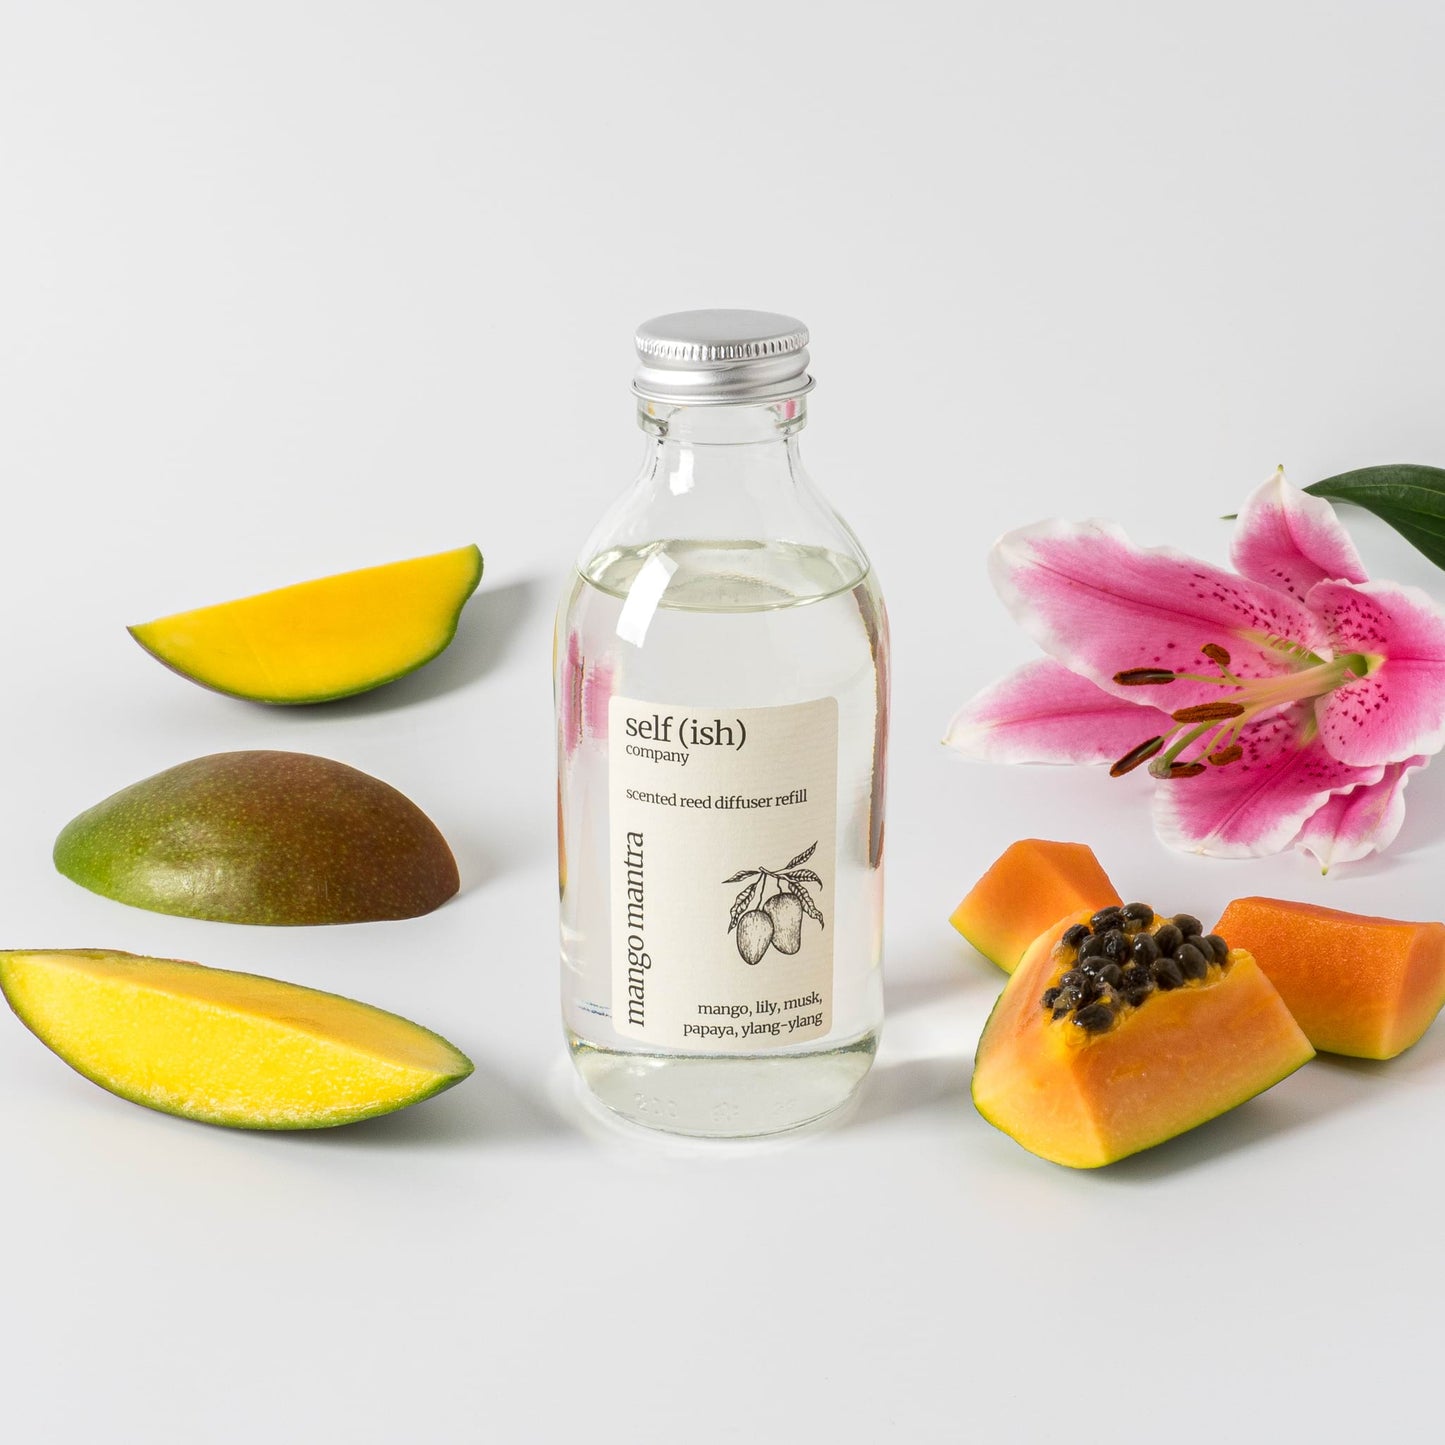 200ml mango reed diffuser refill surrounded by fresh fruits